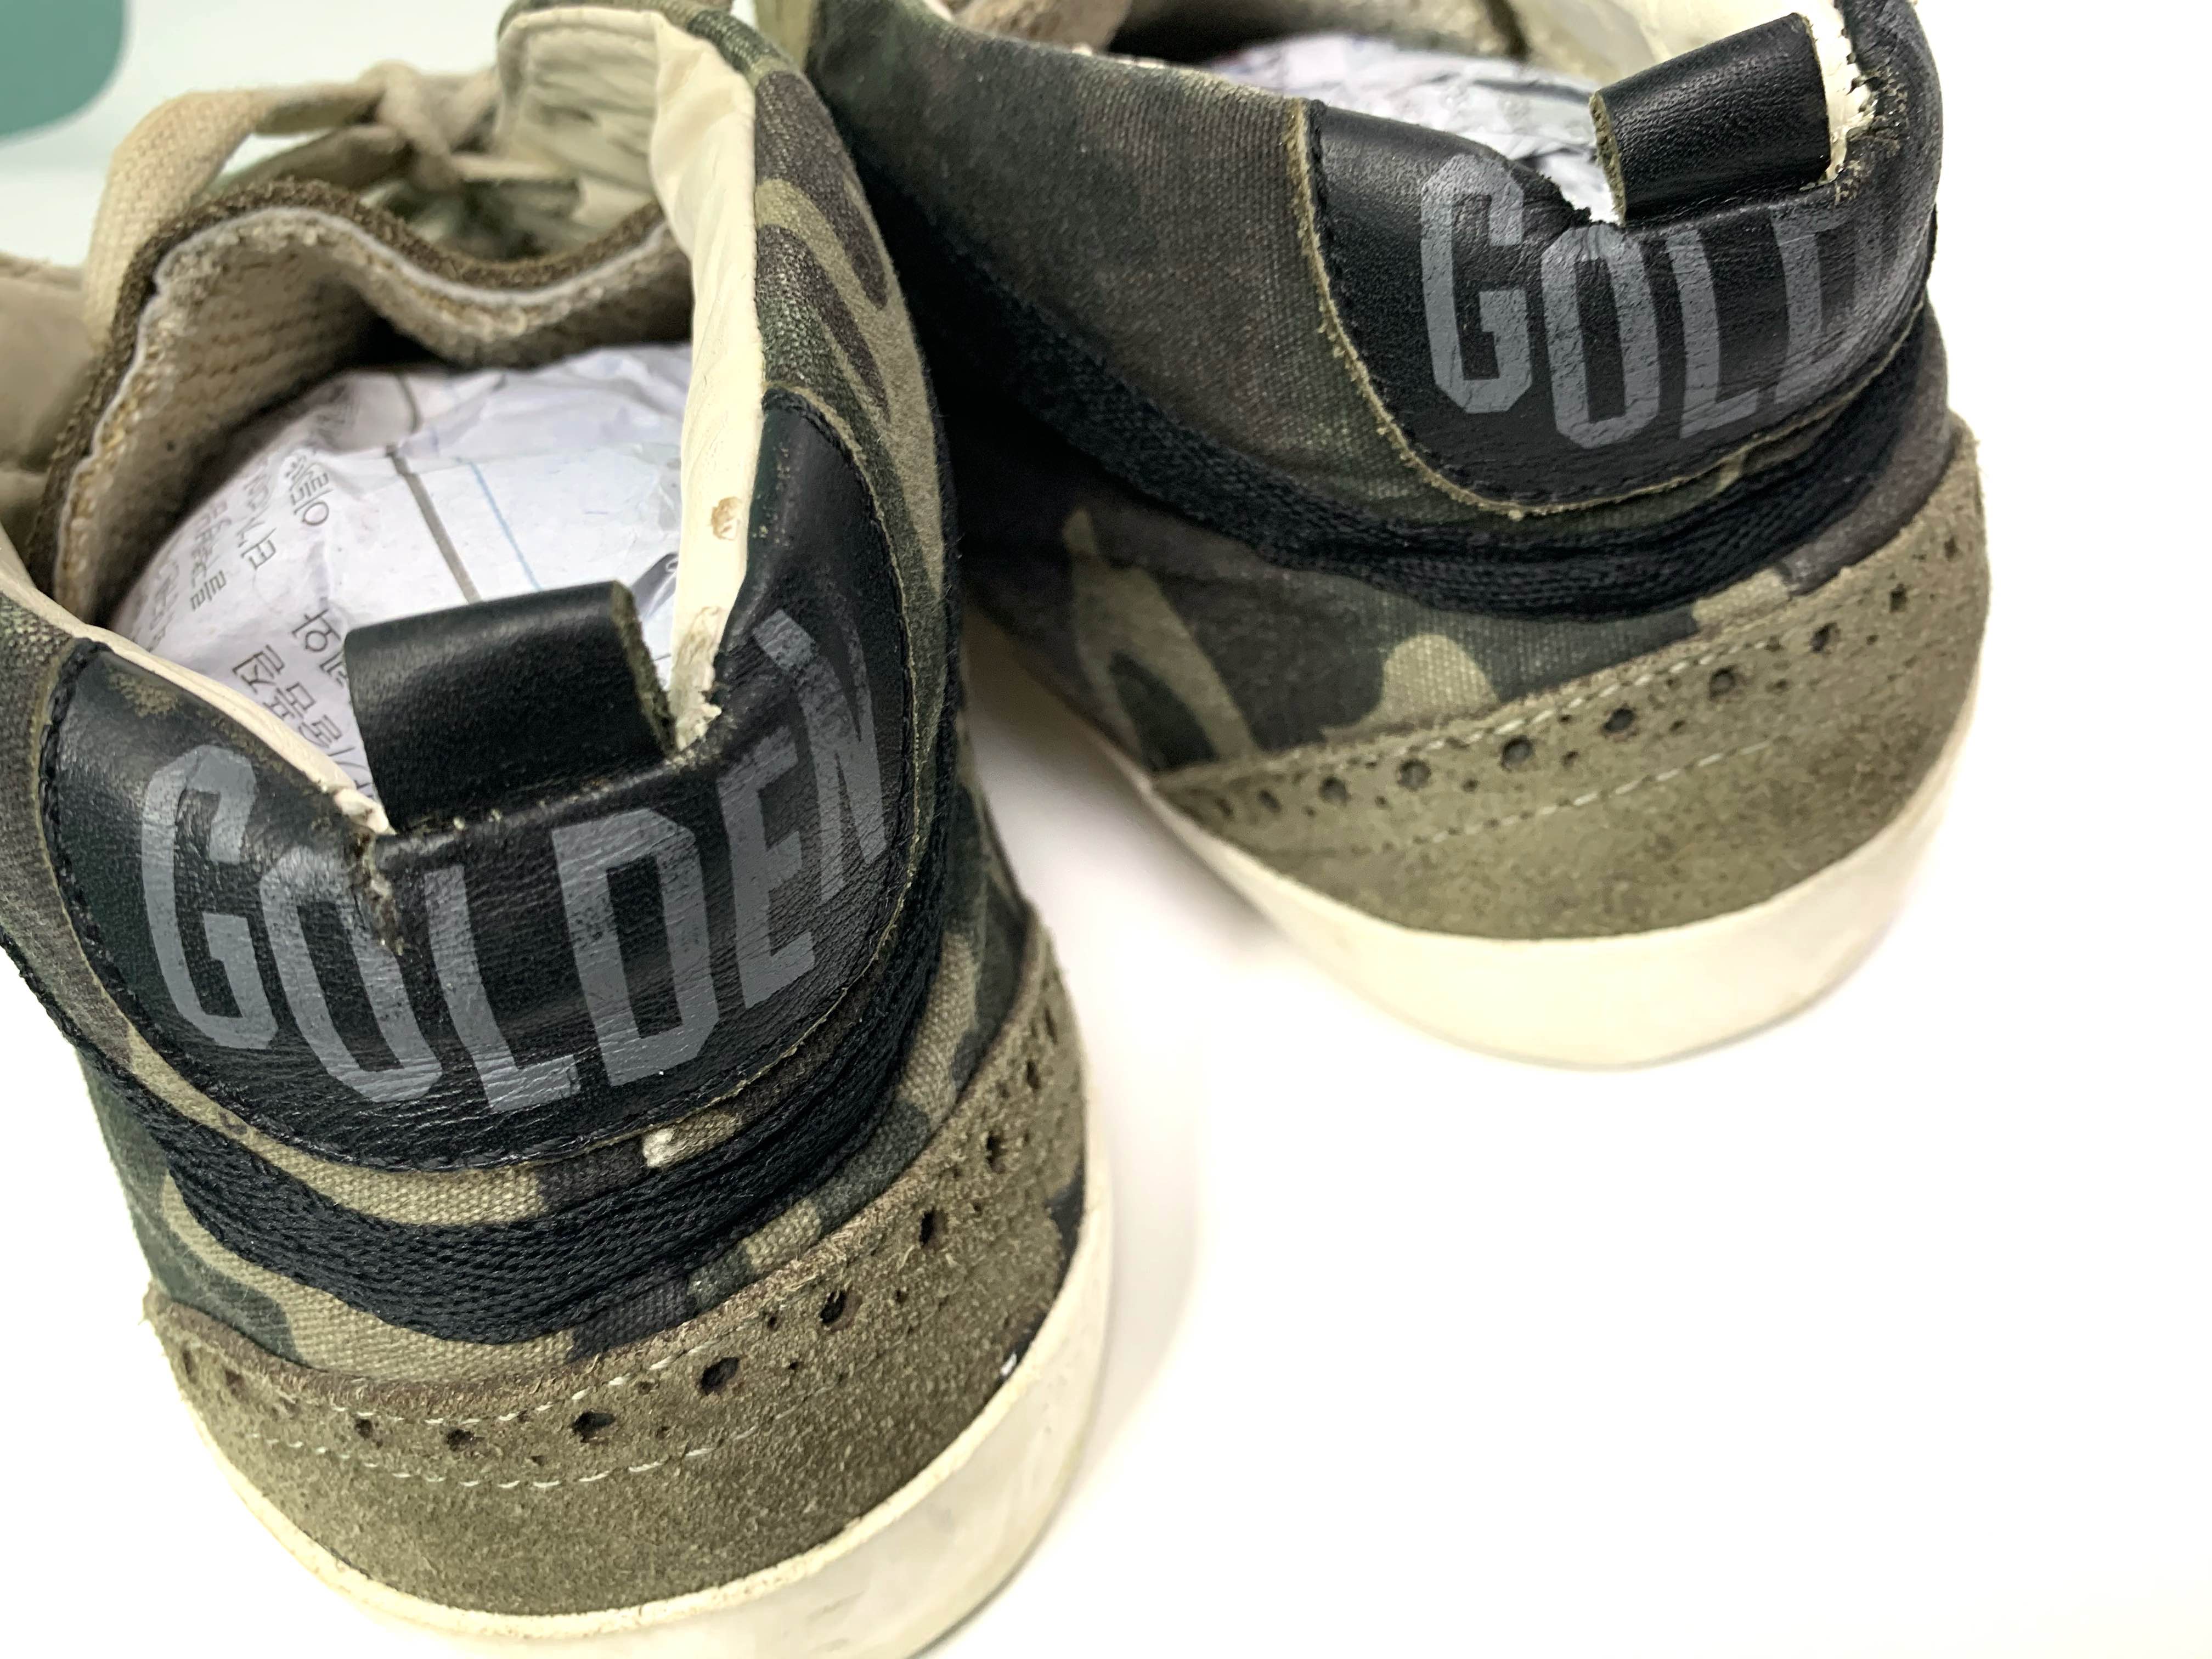 GGDB Midstar Camouflage Sneakers - 4